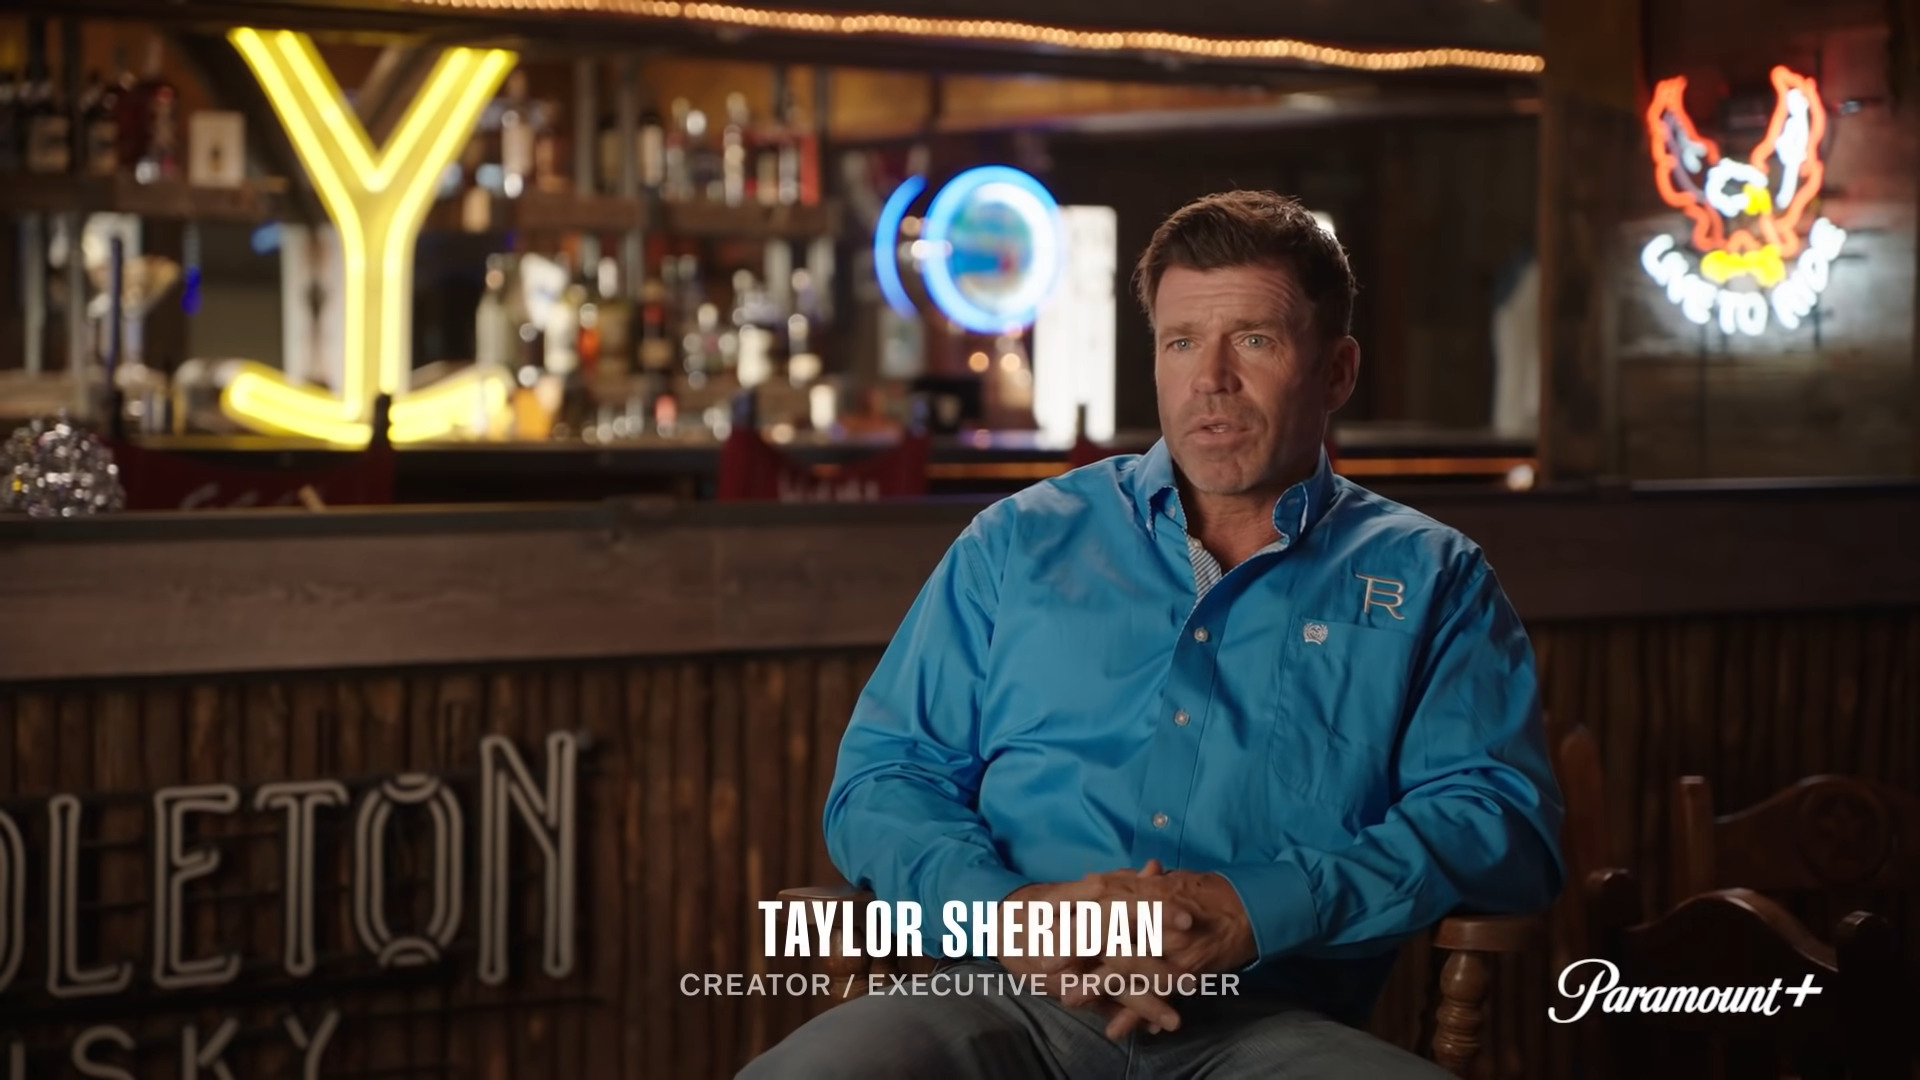 Taylor Sheridan teases his upcoming projects for Paramount Network via "Coming Soon from Taylor Sheridan", Paramount Plus YouTube